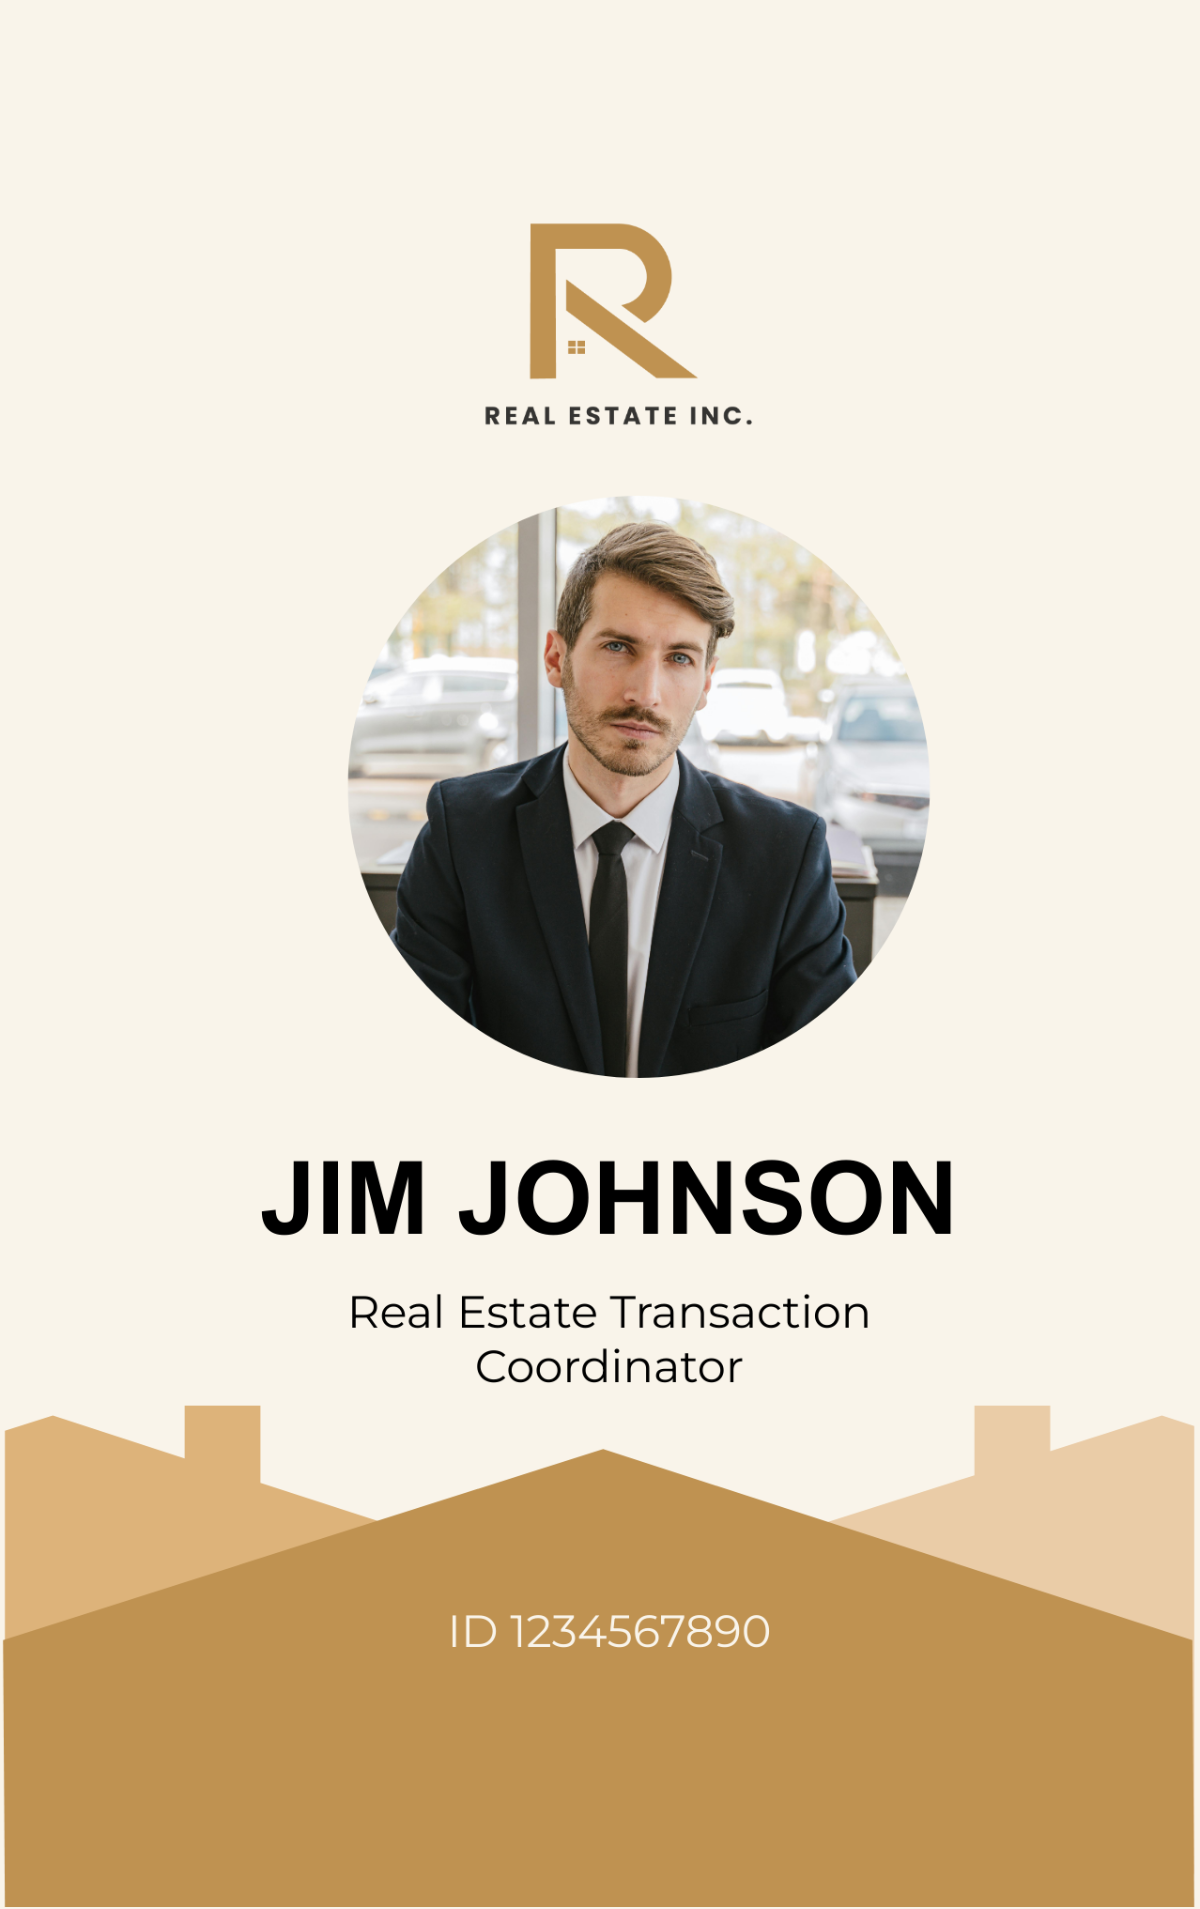 Free Real Estate Transaction Coordinator ID Card Template